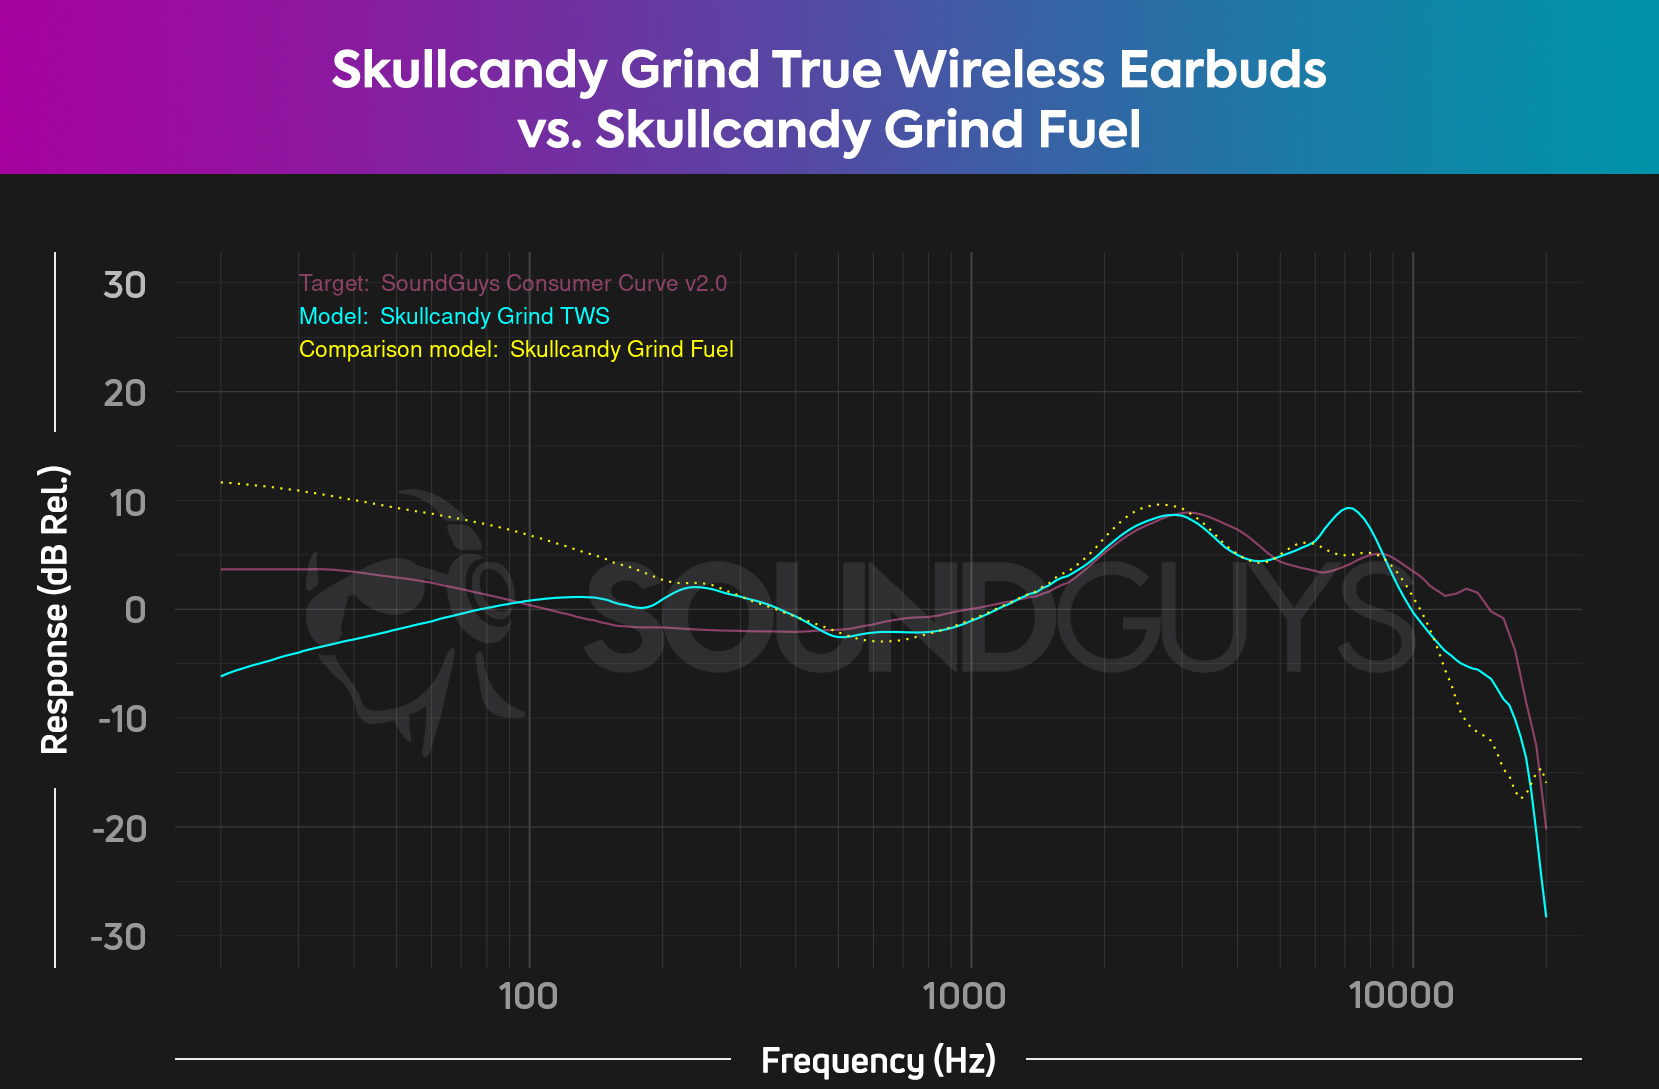 A chart comparing the frequency responses of the Skullcandy Grind and Skullcandy Grind Fuel